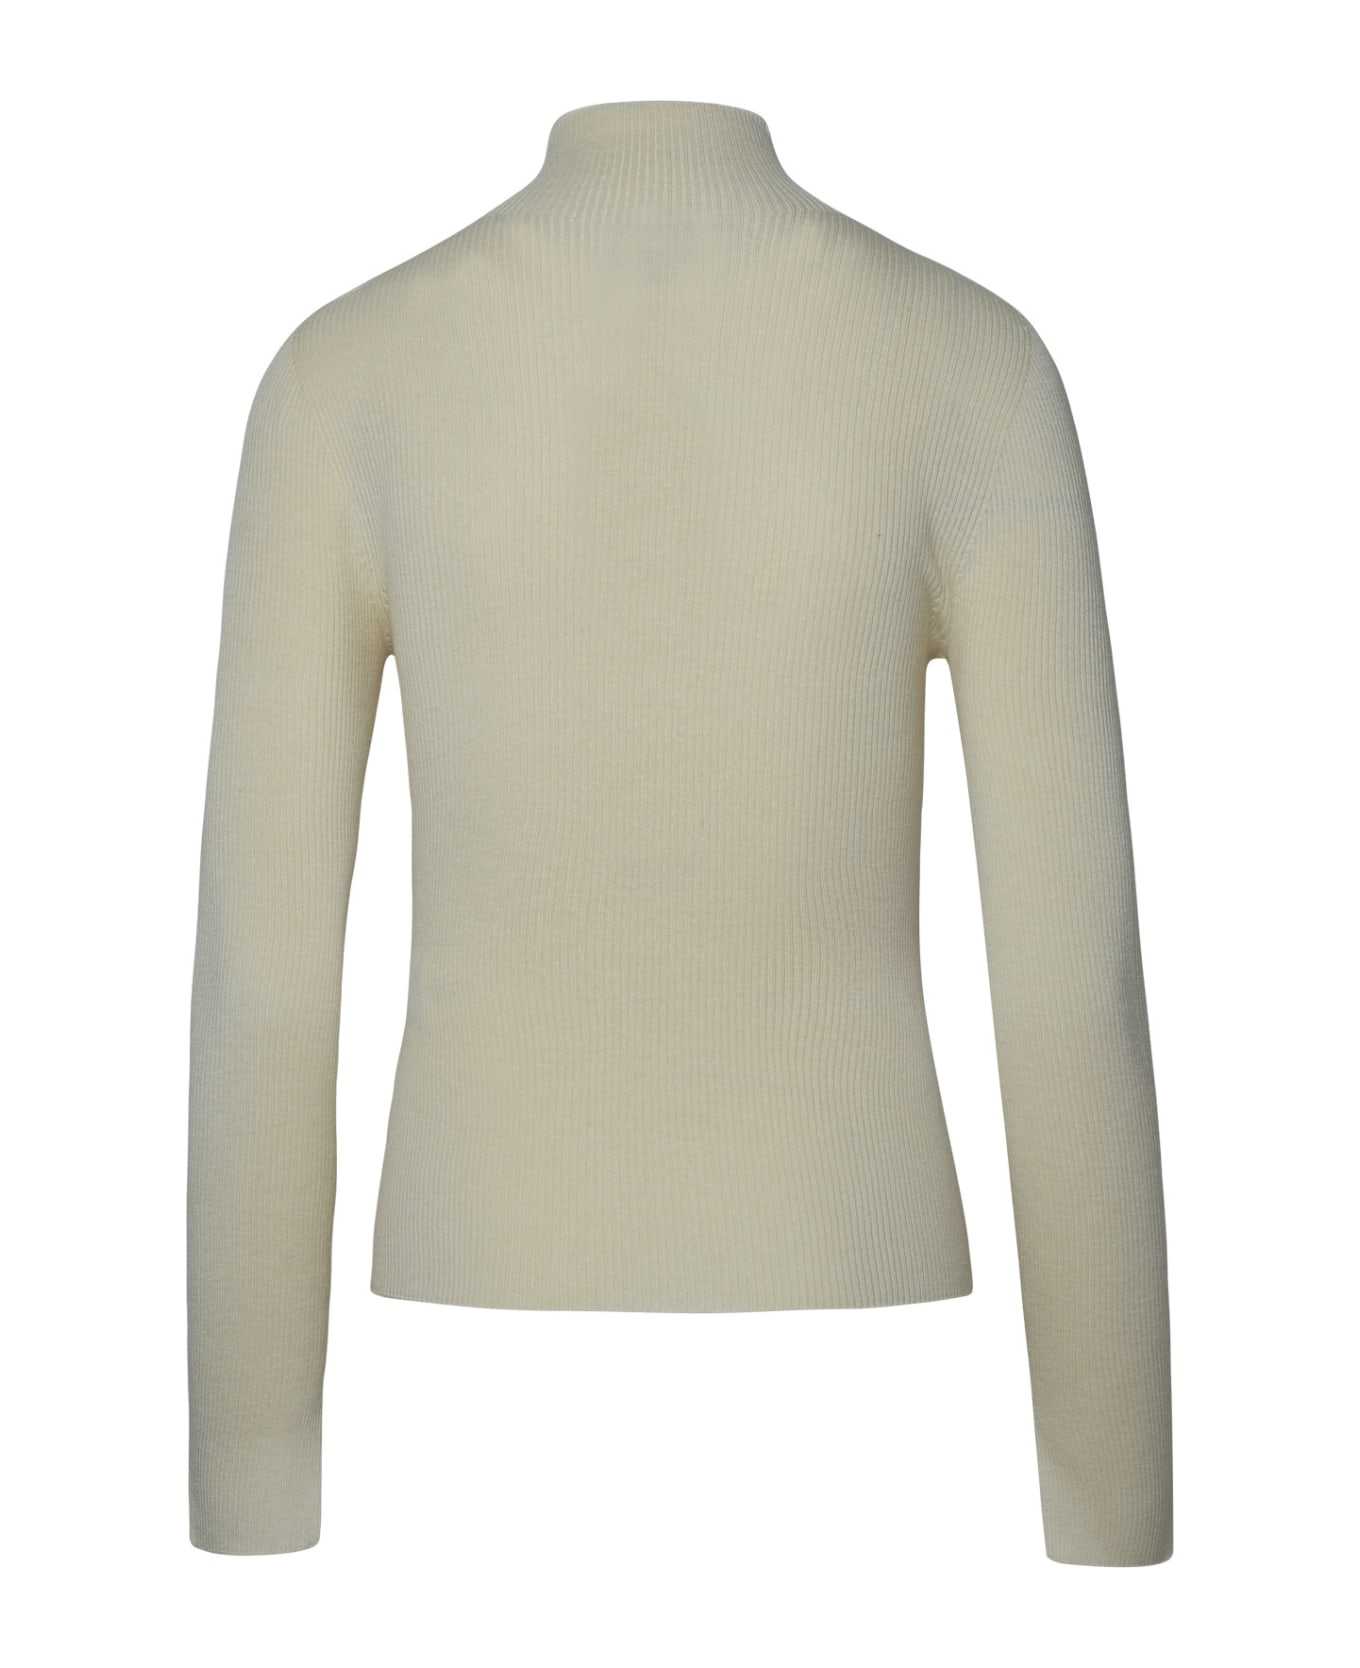 A.P.C. Cashmere Blend Sweater - AAC ニットウェア